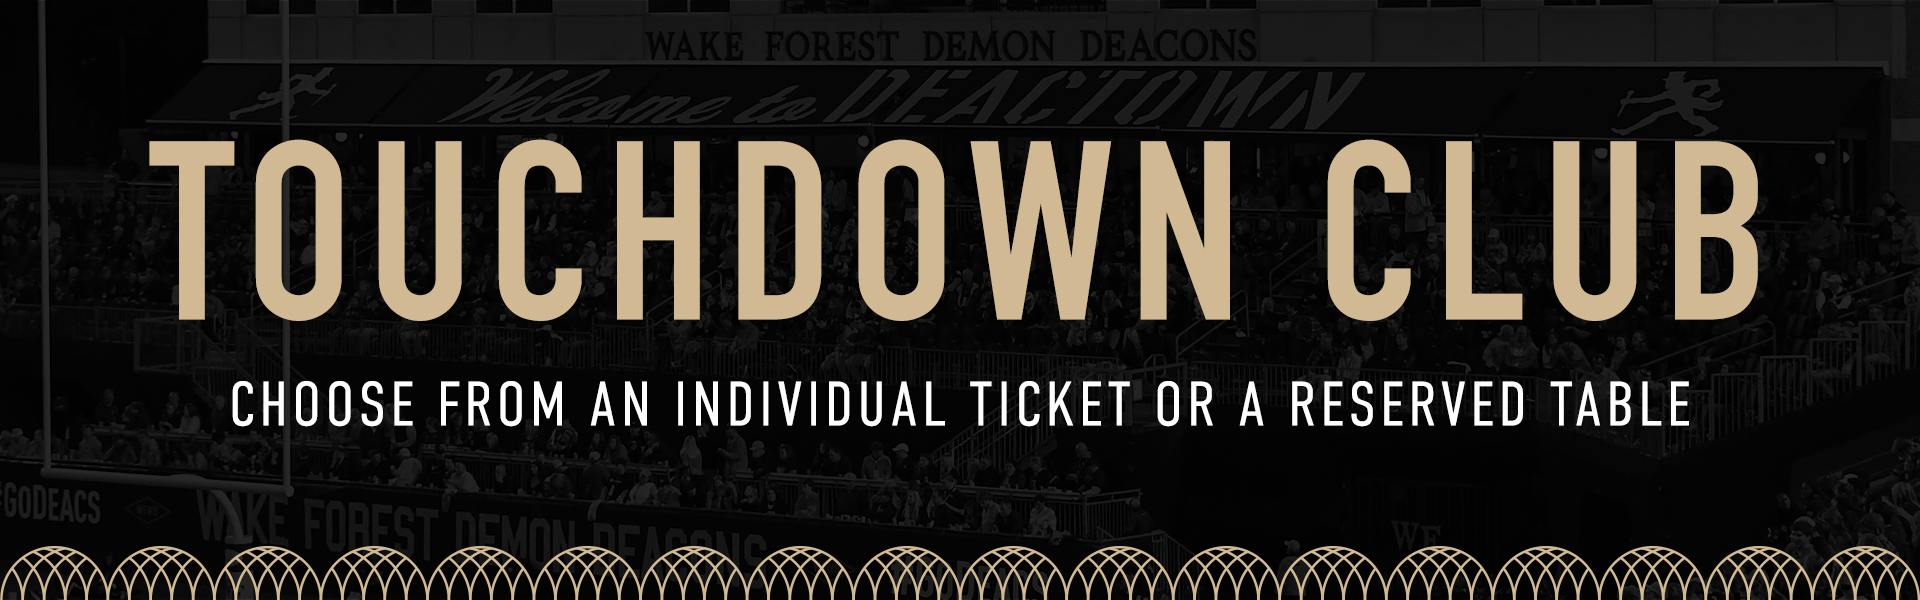 Touchdown Club | Choose from an Individual Ticket or a Reserved Table